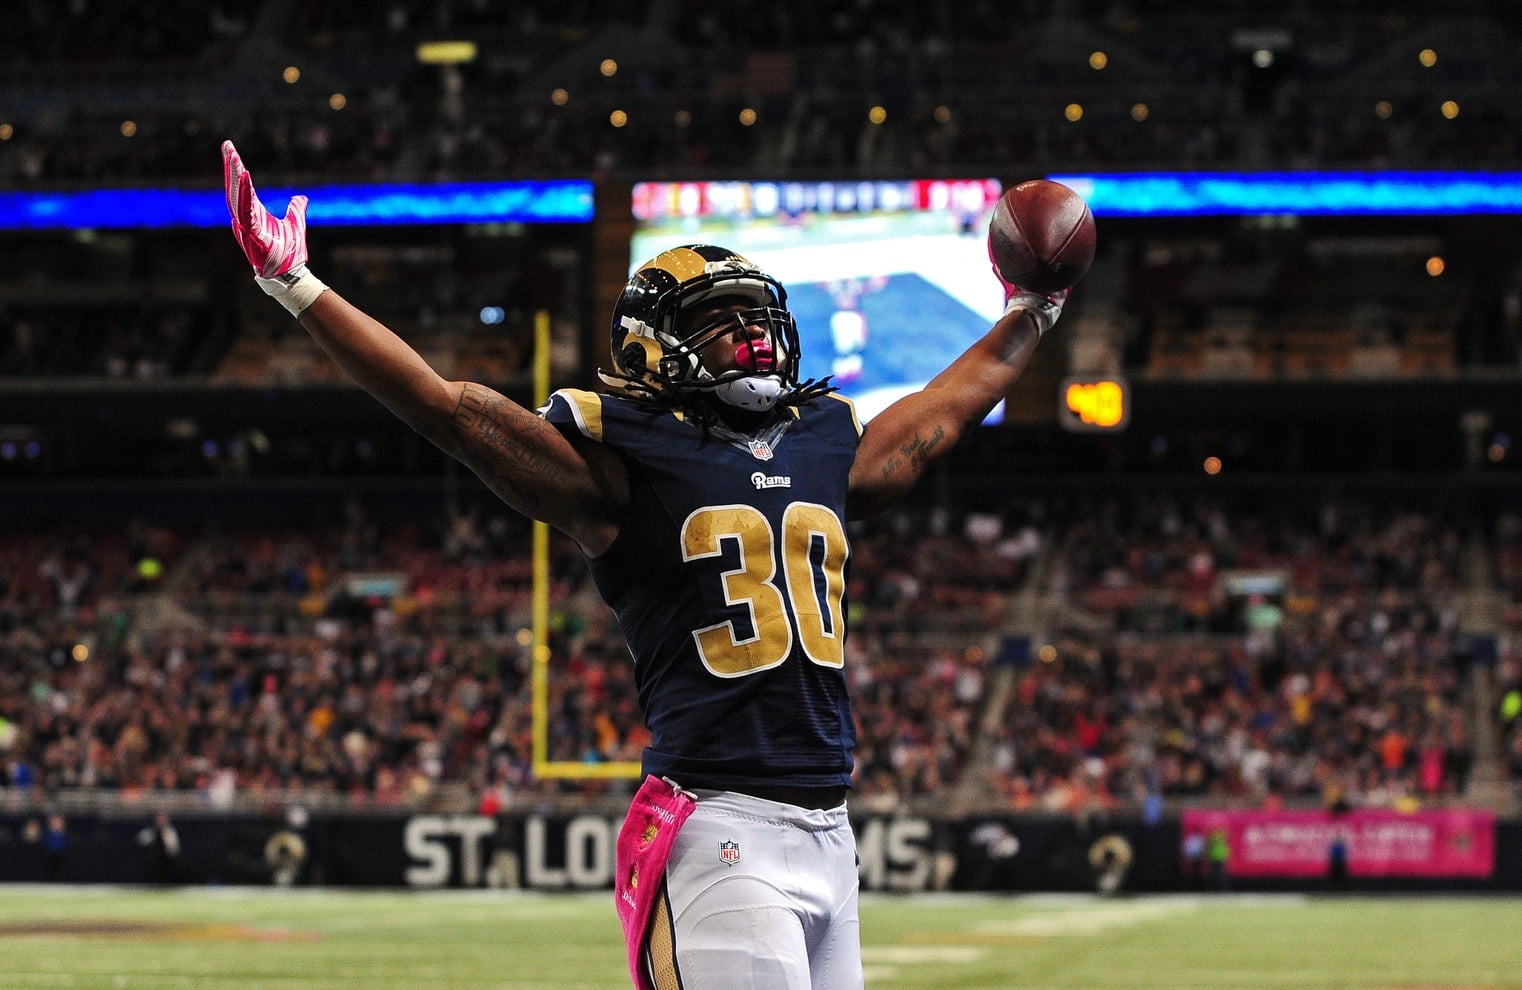 Todd Gurley